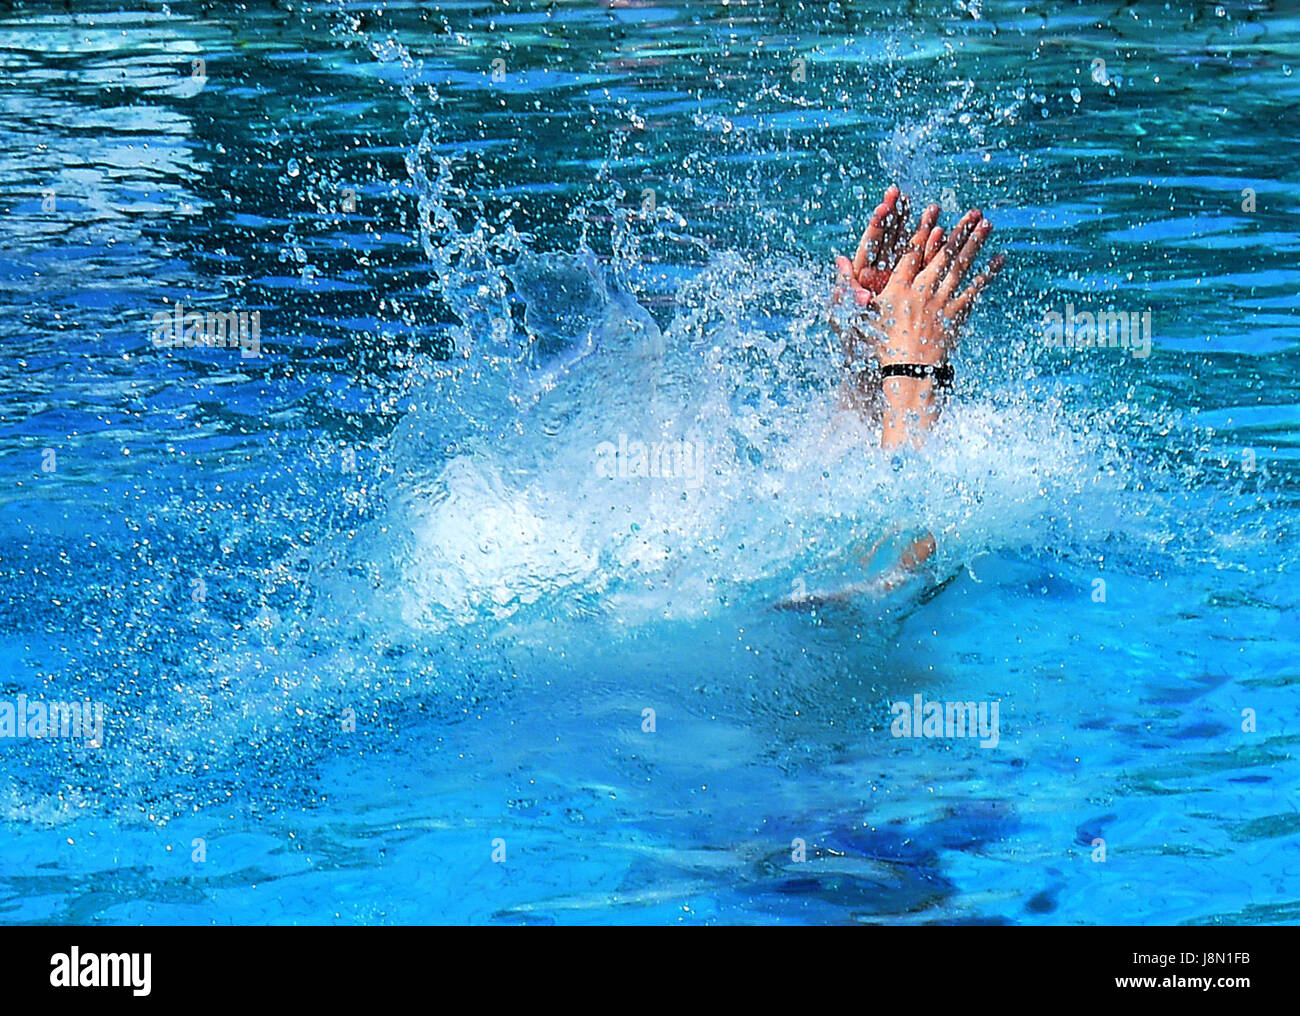 A young man jumps into the diving pool at an openair pool in Sarstedt